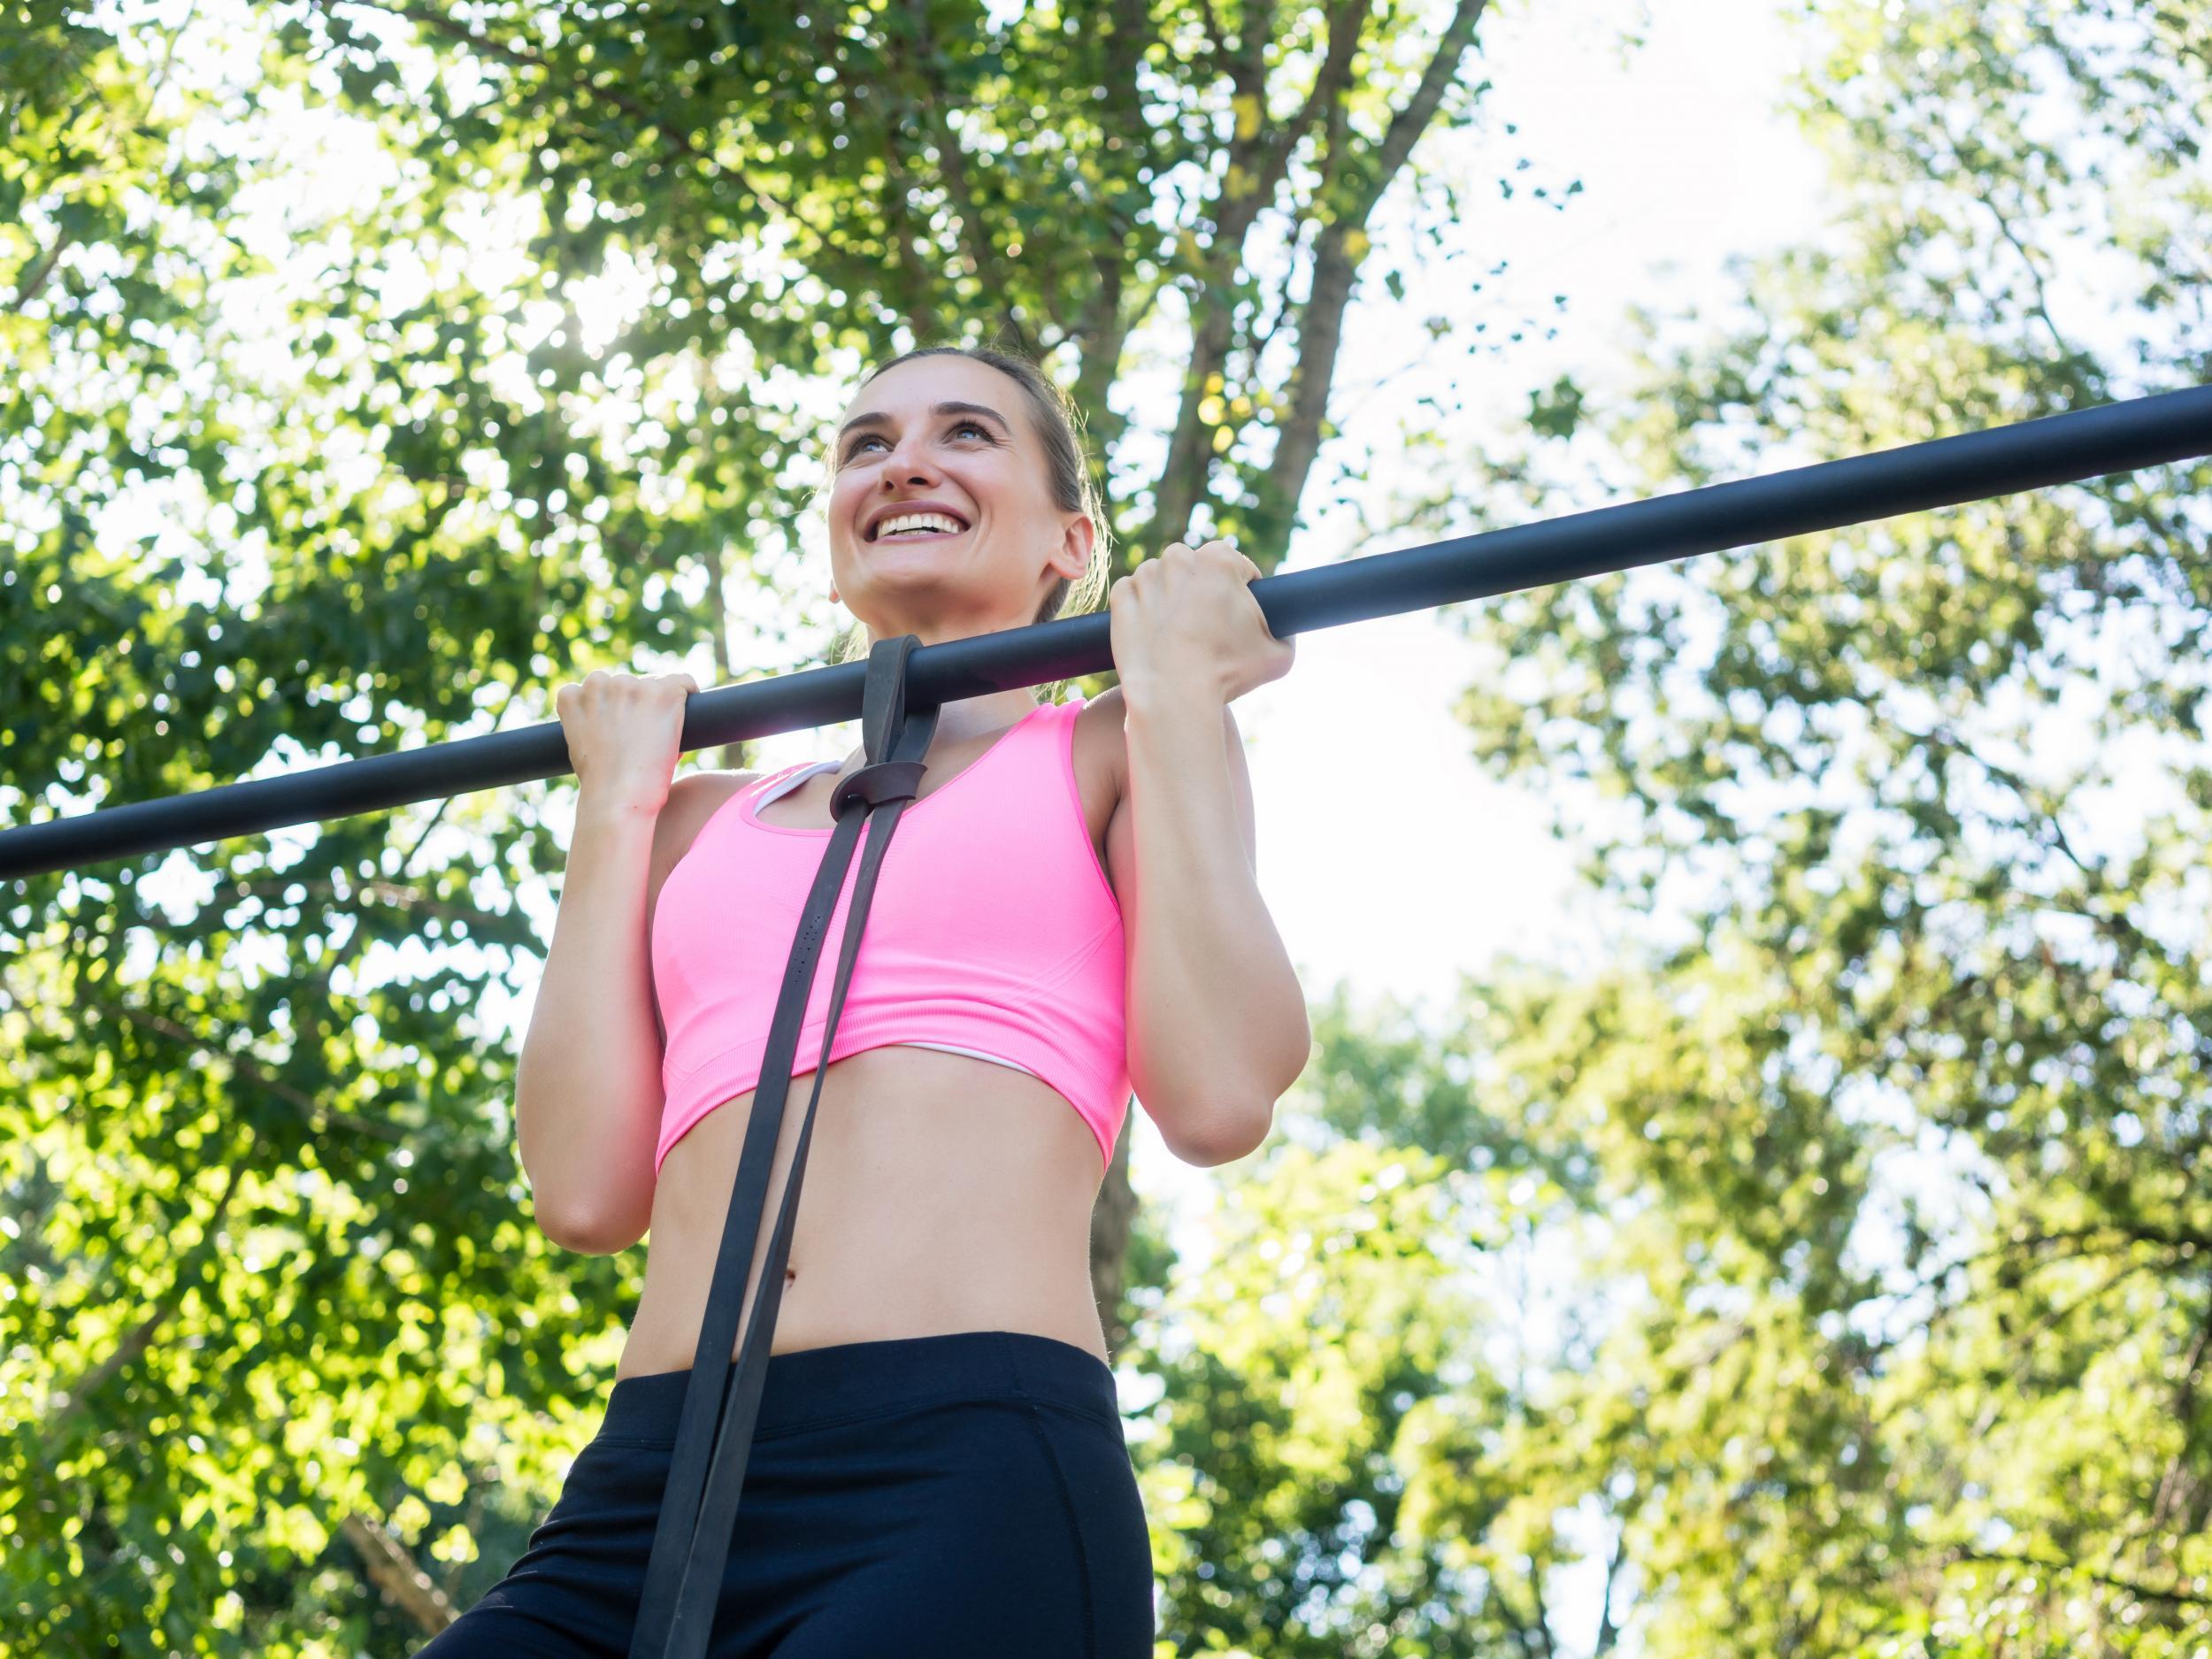 Pull ups can be performed at almost any park